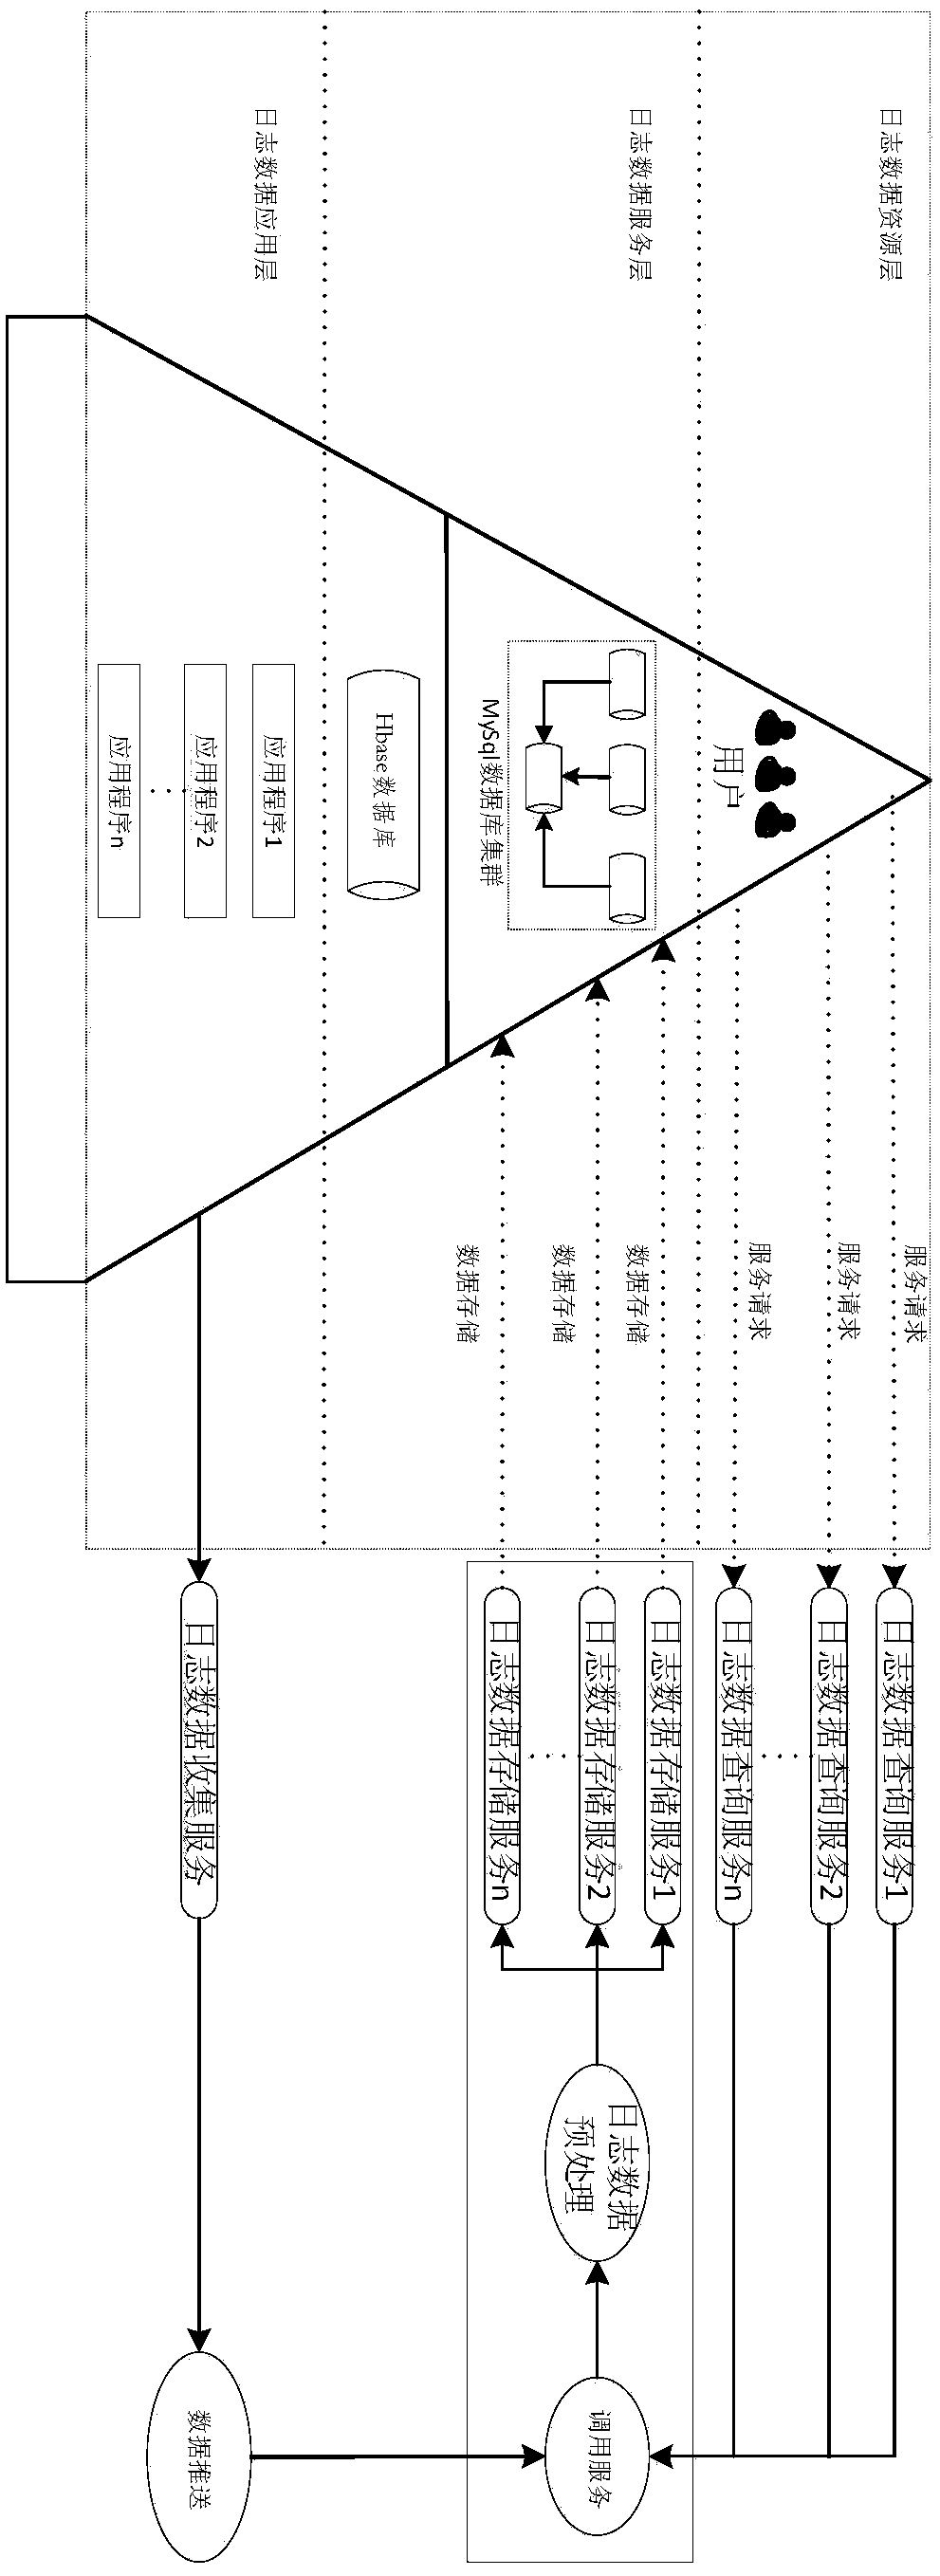 Spark-based application software running log collection and service processing system and method